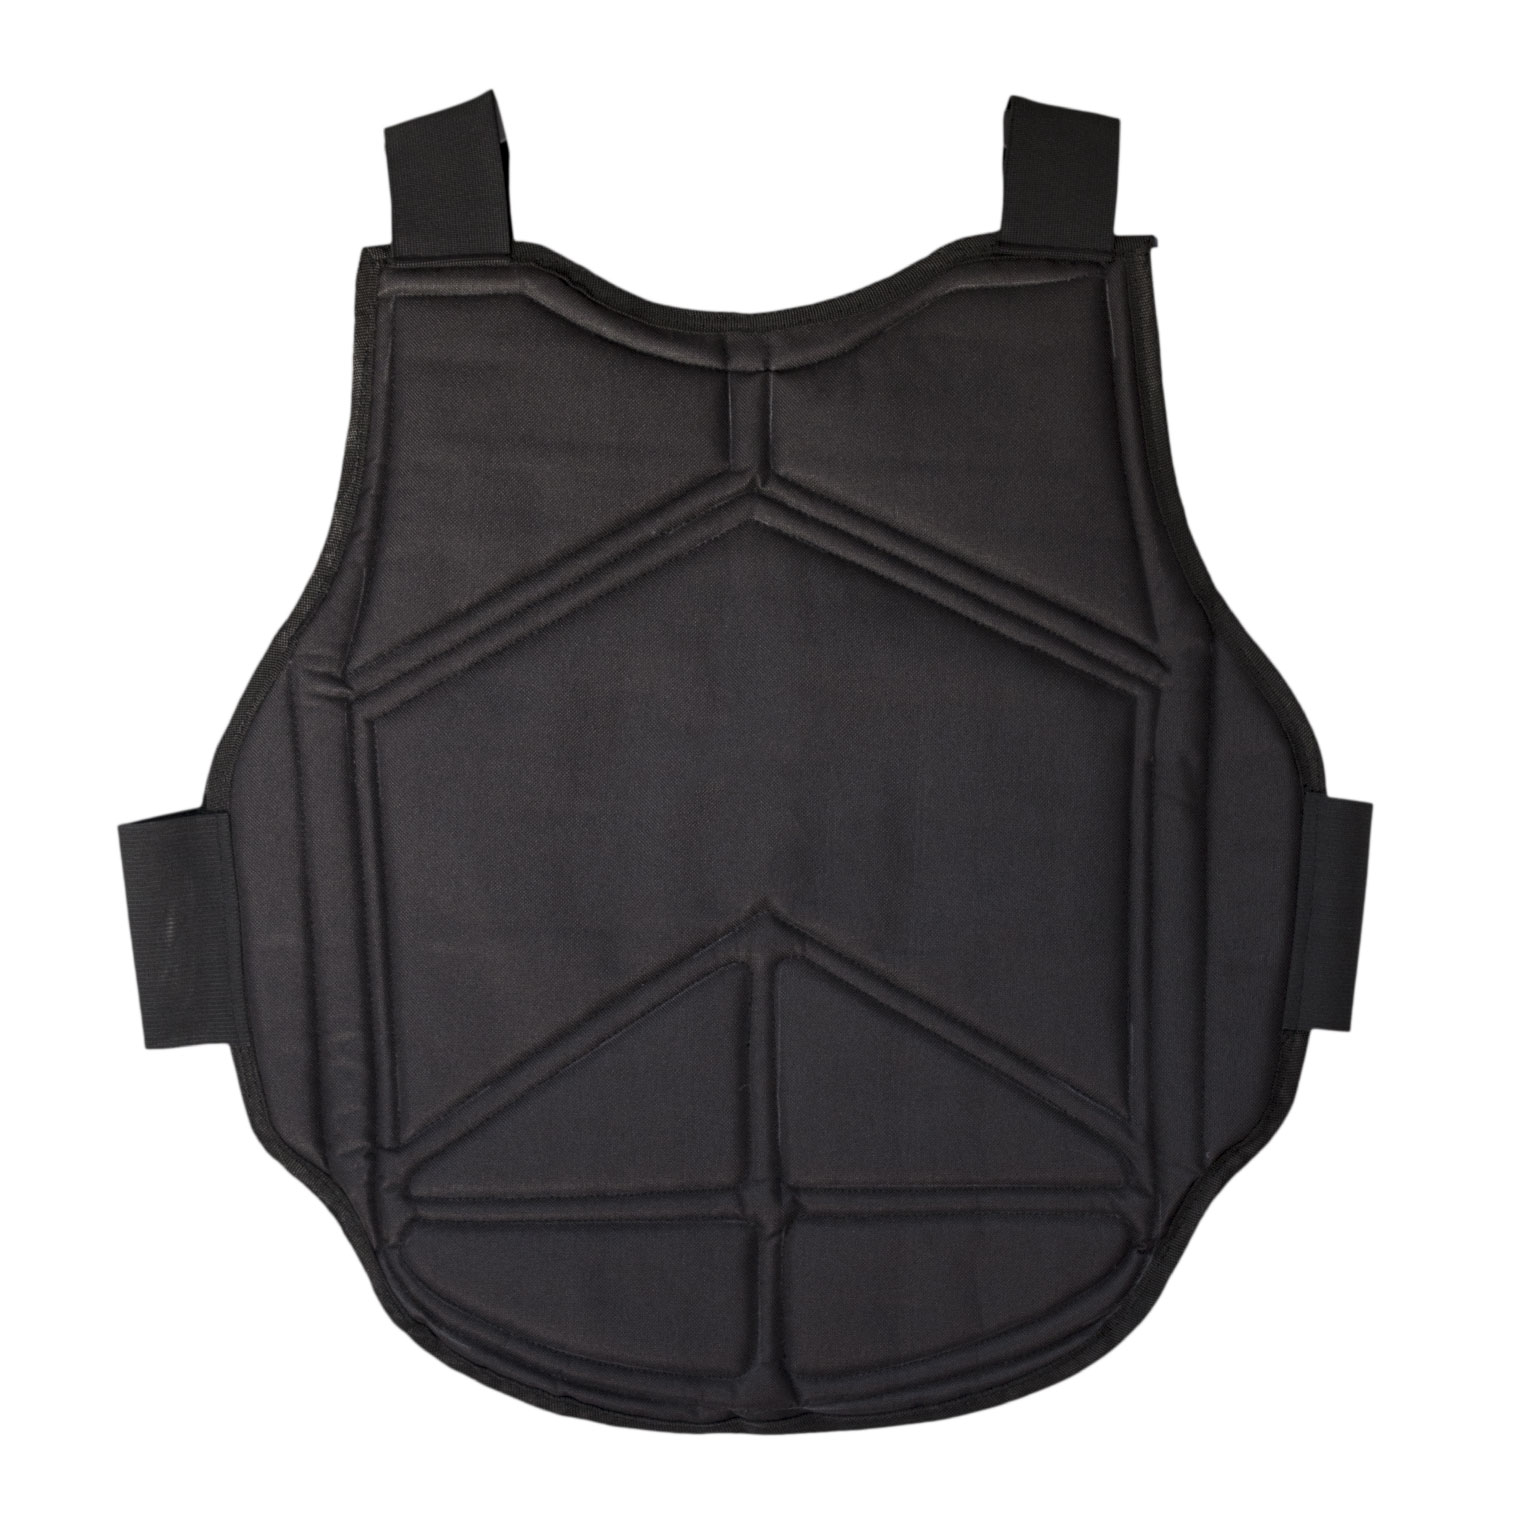 FIELD Chest Protector Black, Adult